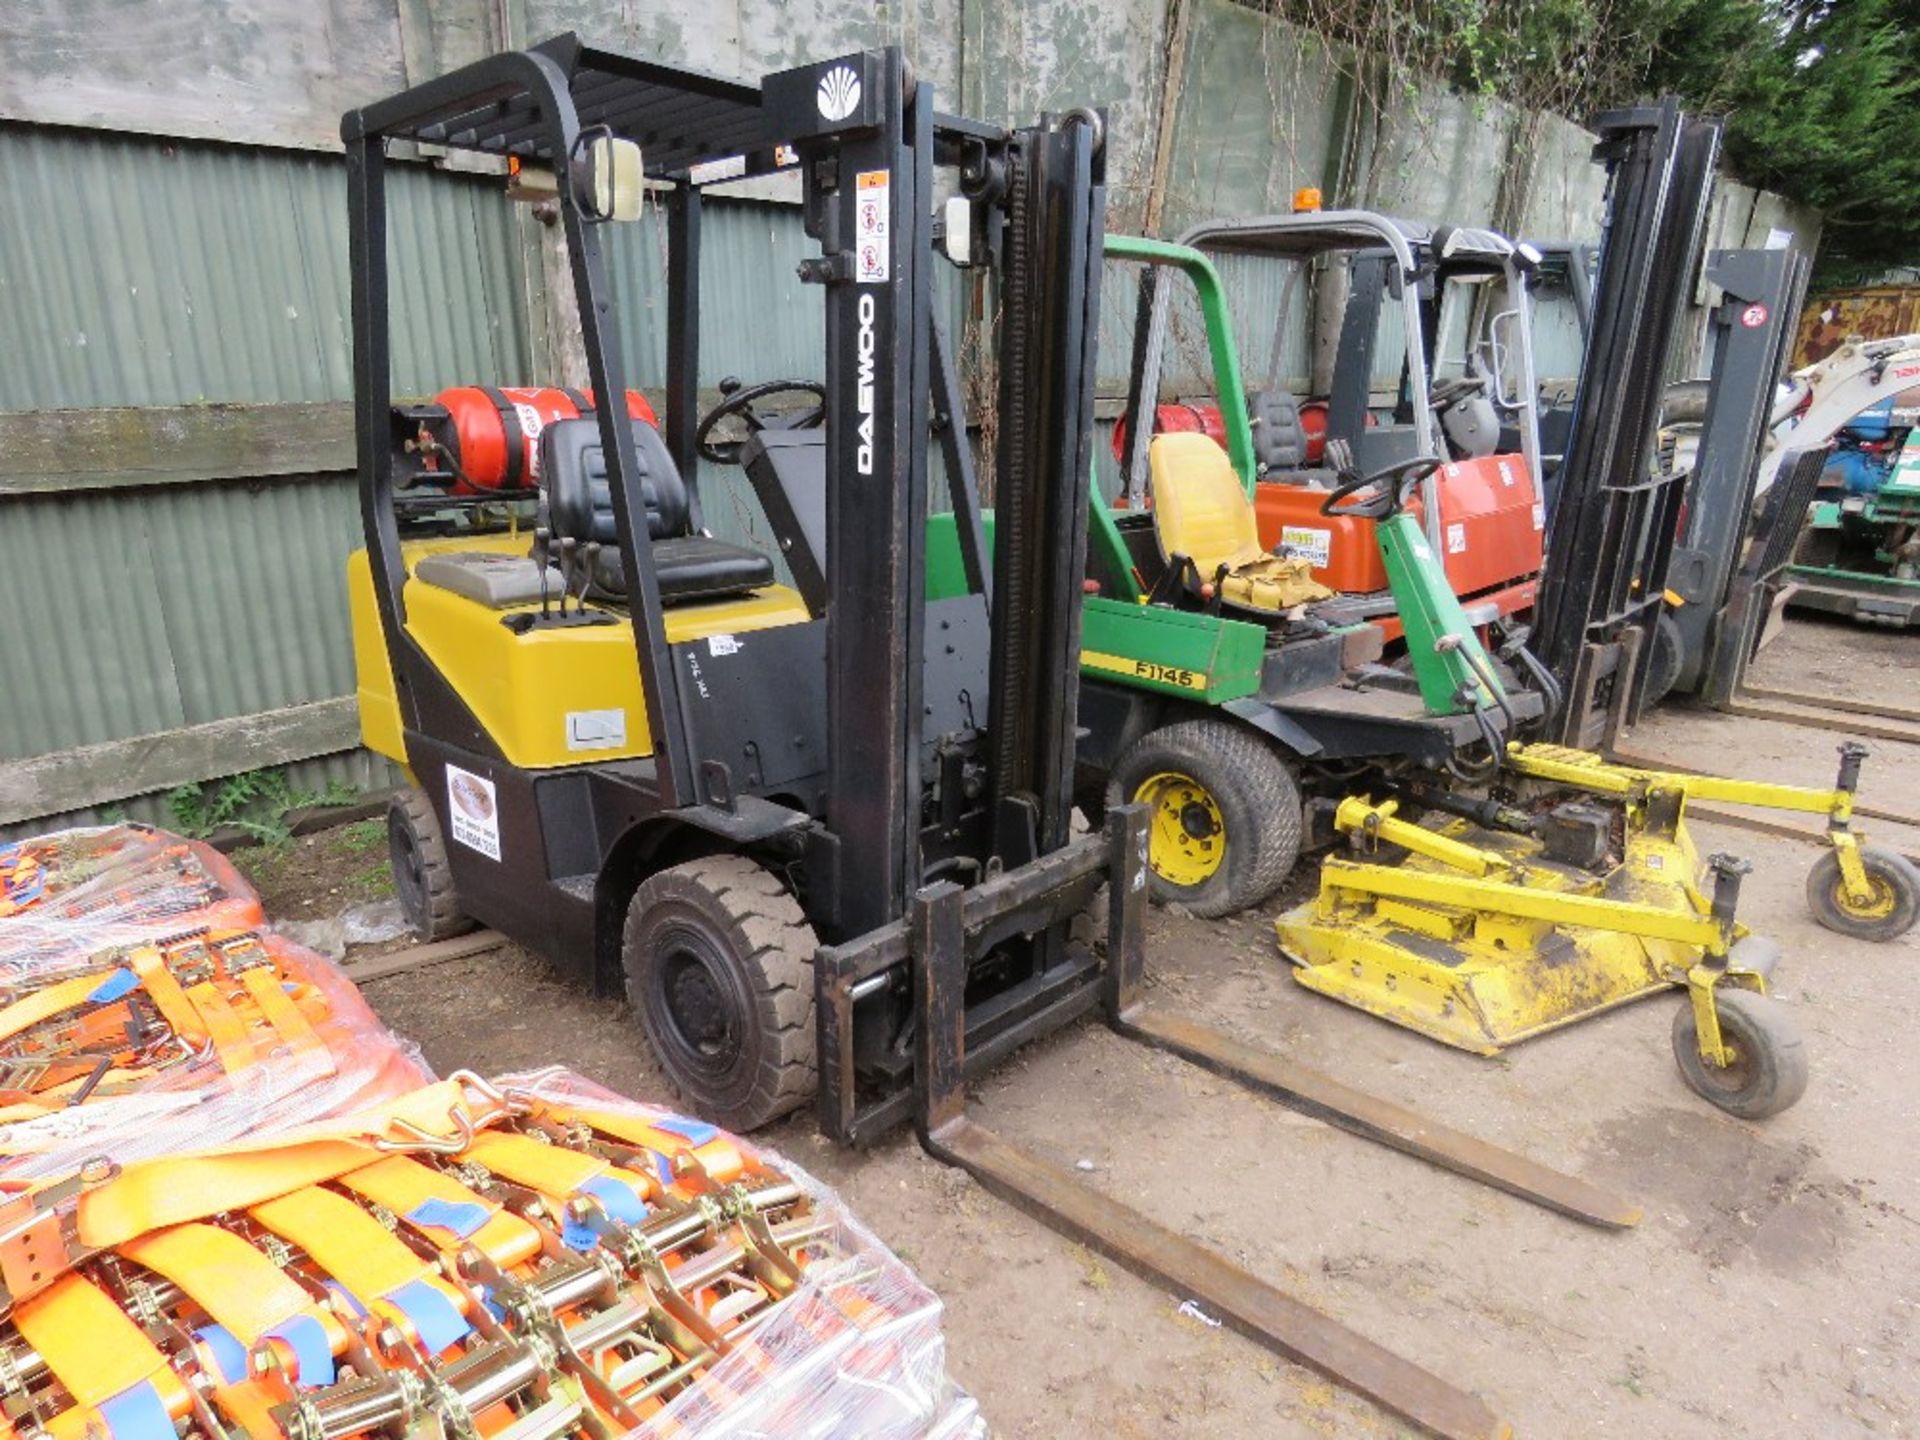 DAEWOO G18S-2 GAS POWERED FORKLIFT TRUCK WITH SIDE SHIFT. 1.8TONNE LIFT CAPACITY. 8136 REC HOURS. YE